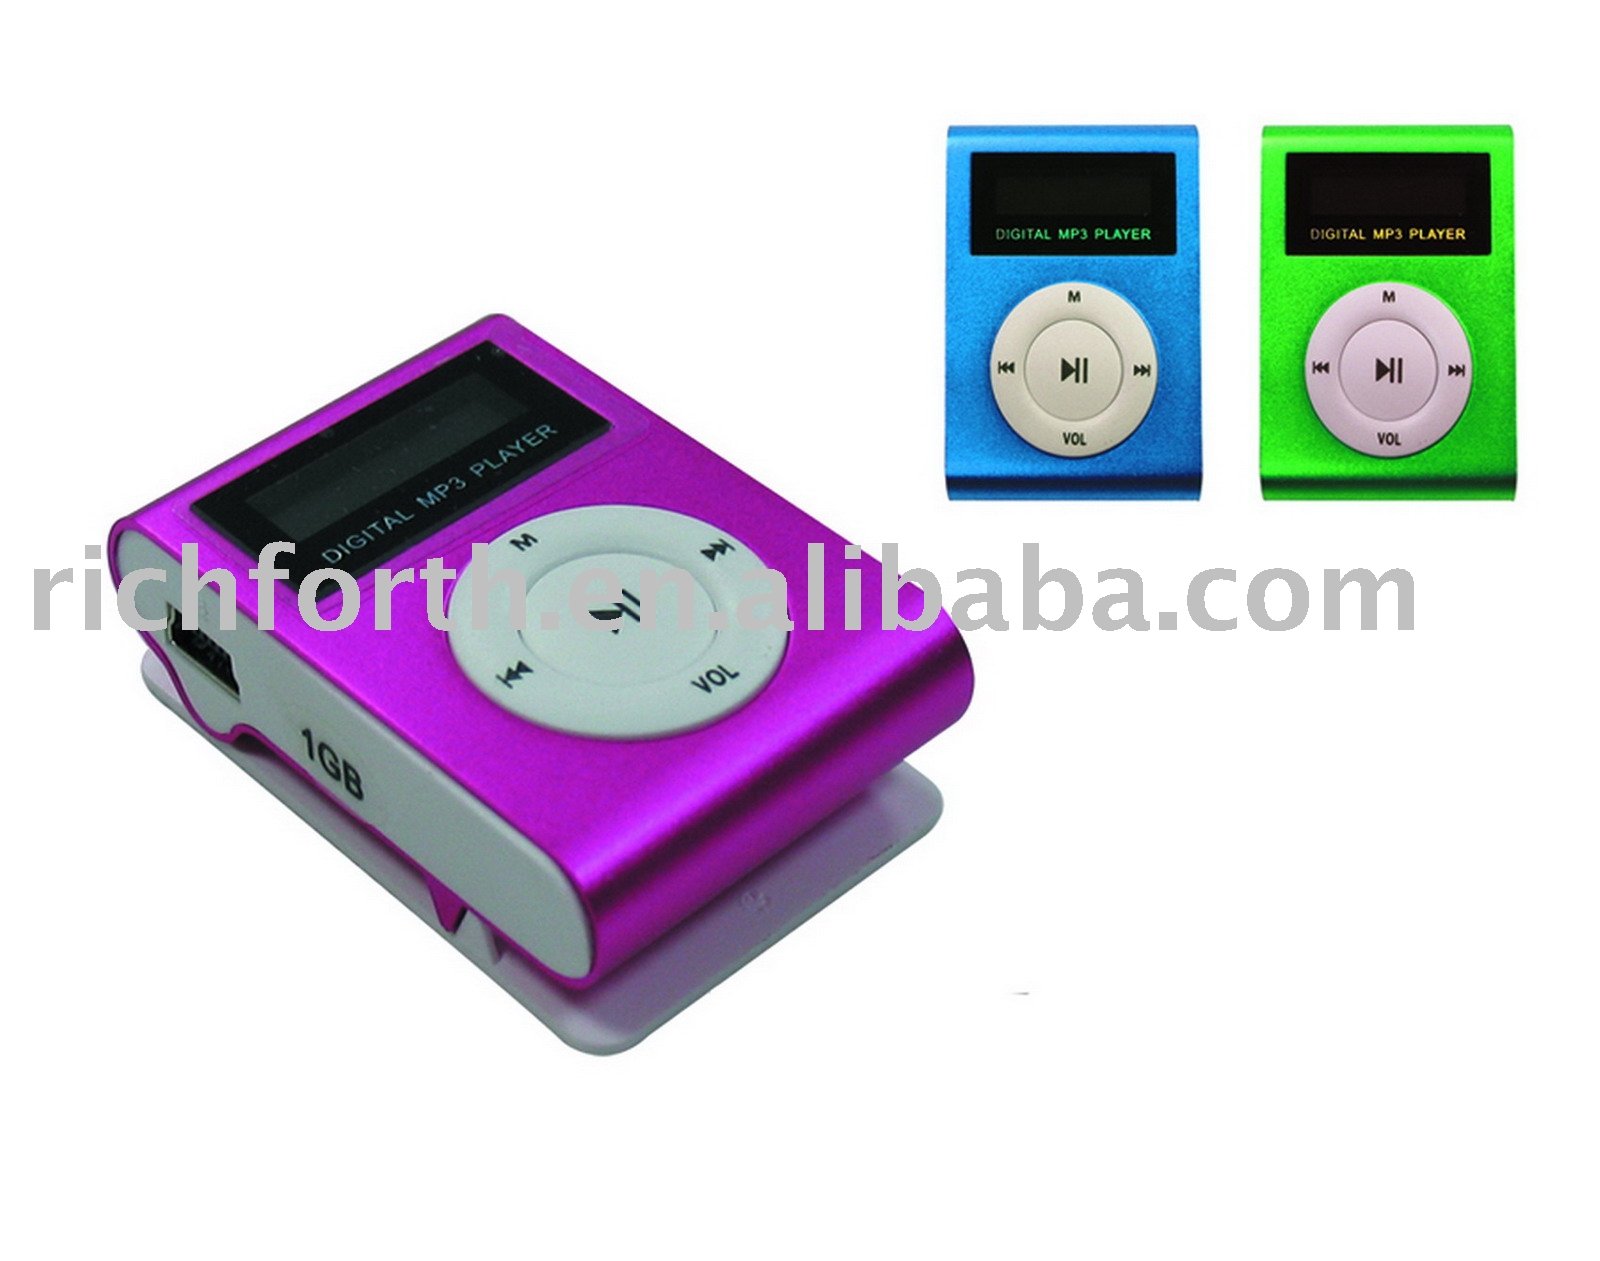 Video  Player on Digital Mp3 Player Products  Buy Digital Mp3 Player Products From